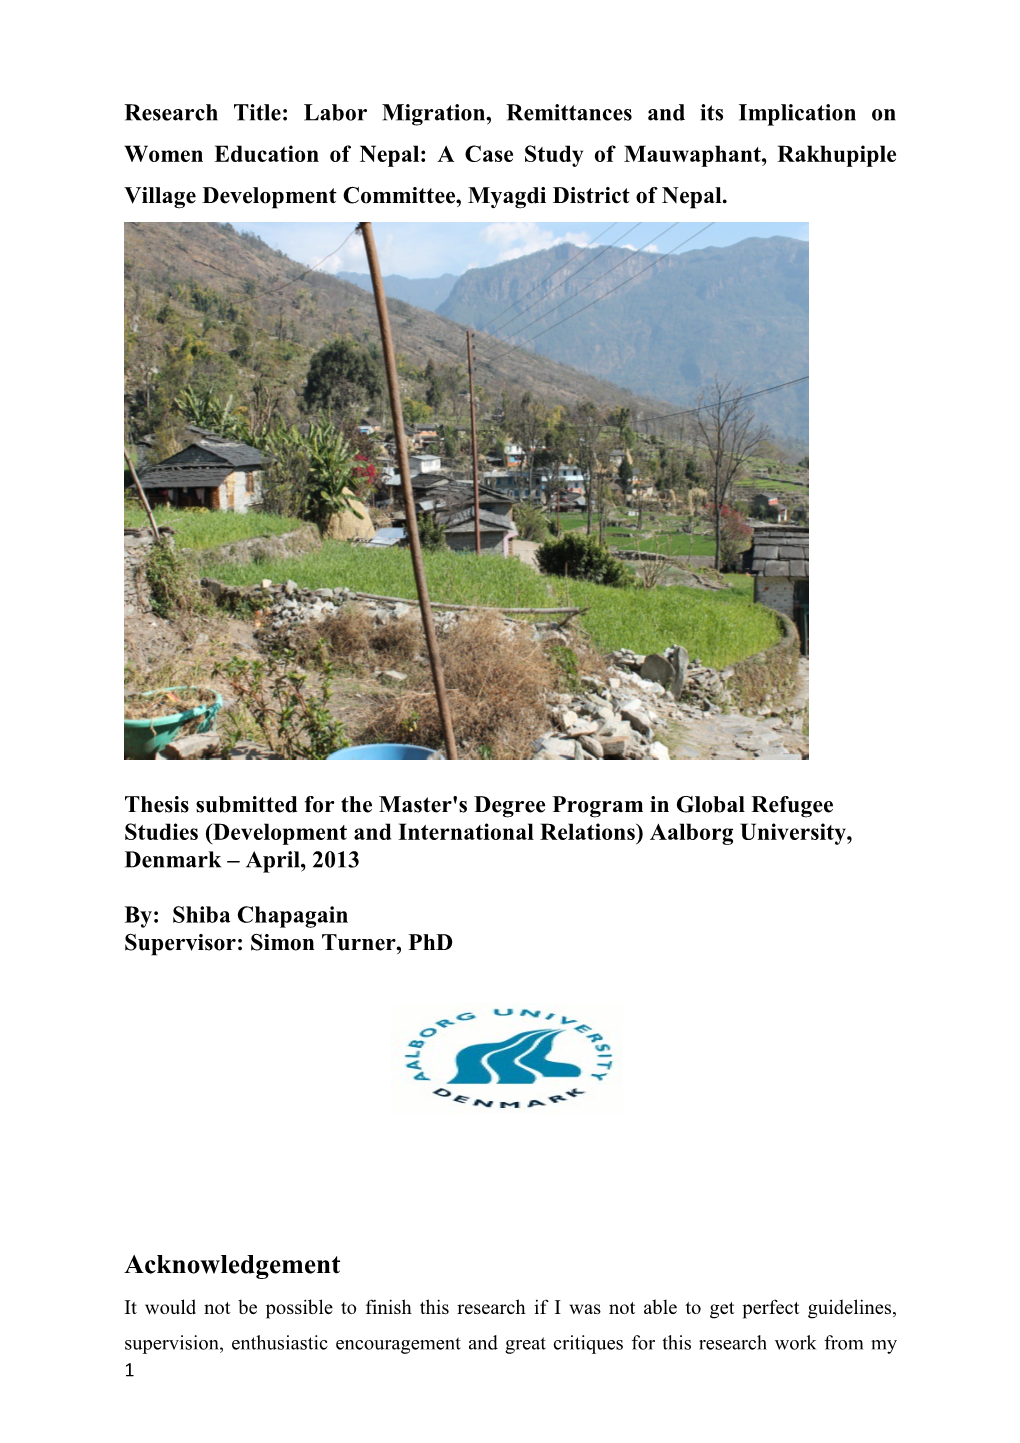 Research Title: Labor Migration, Remittances and Its Implication on Women Education Of